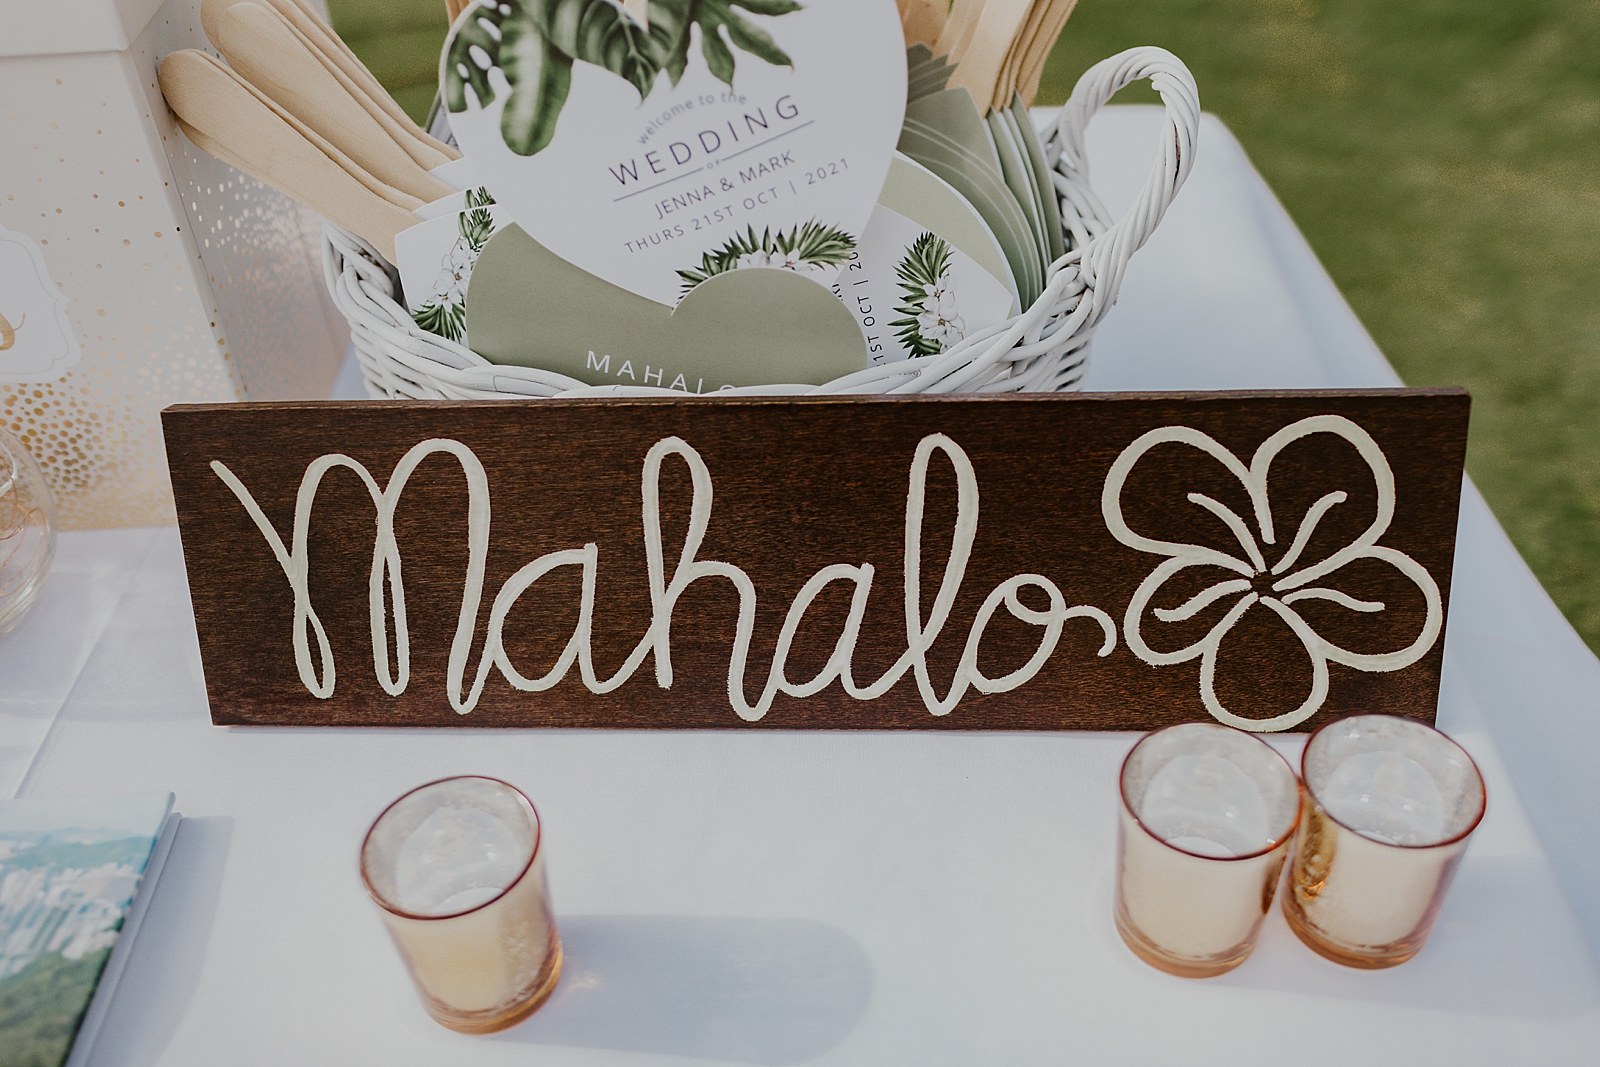 Detail shot of "Mahalo" sign on welcome table